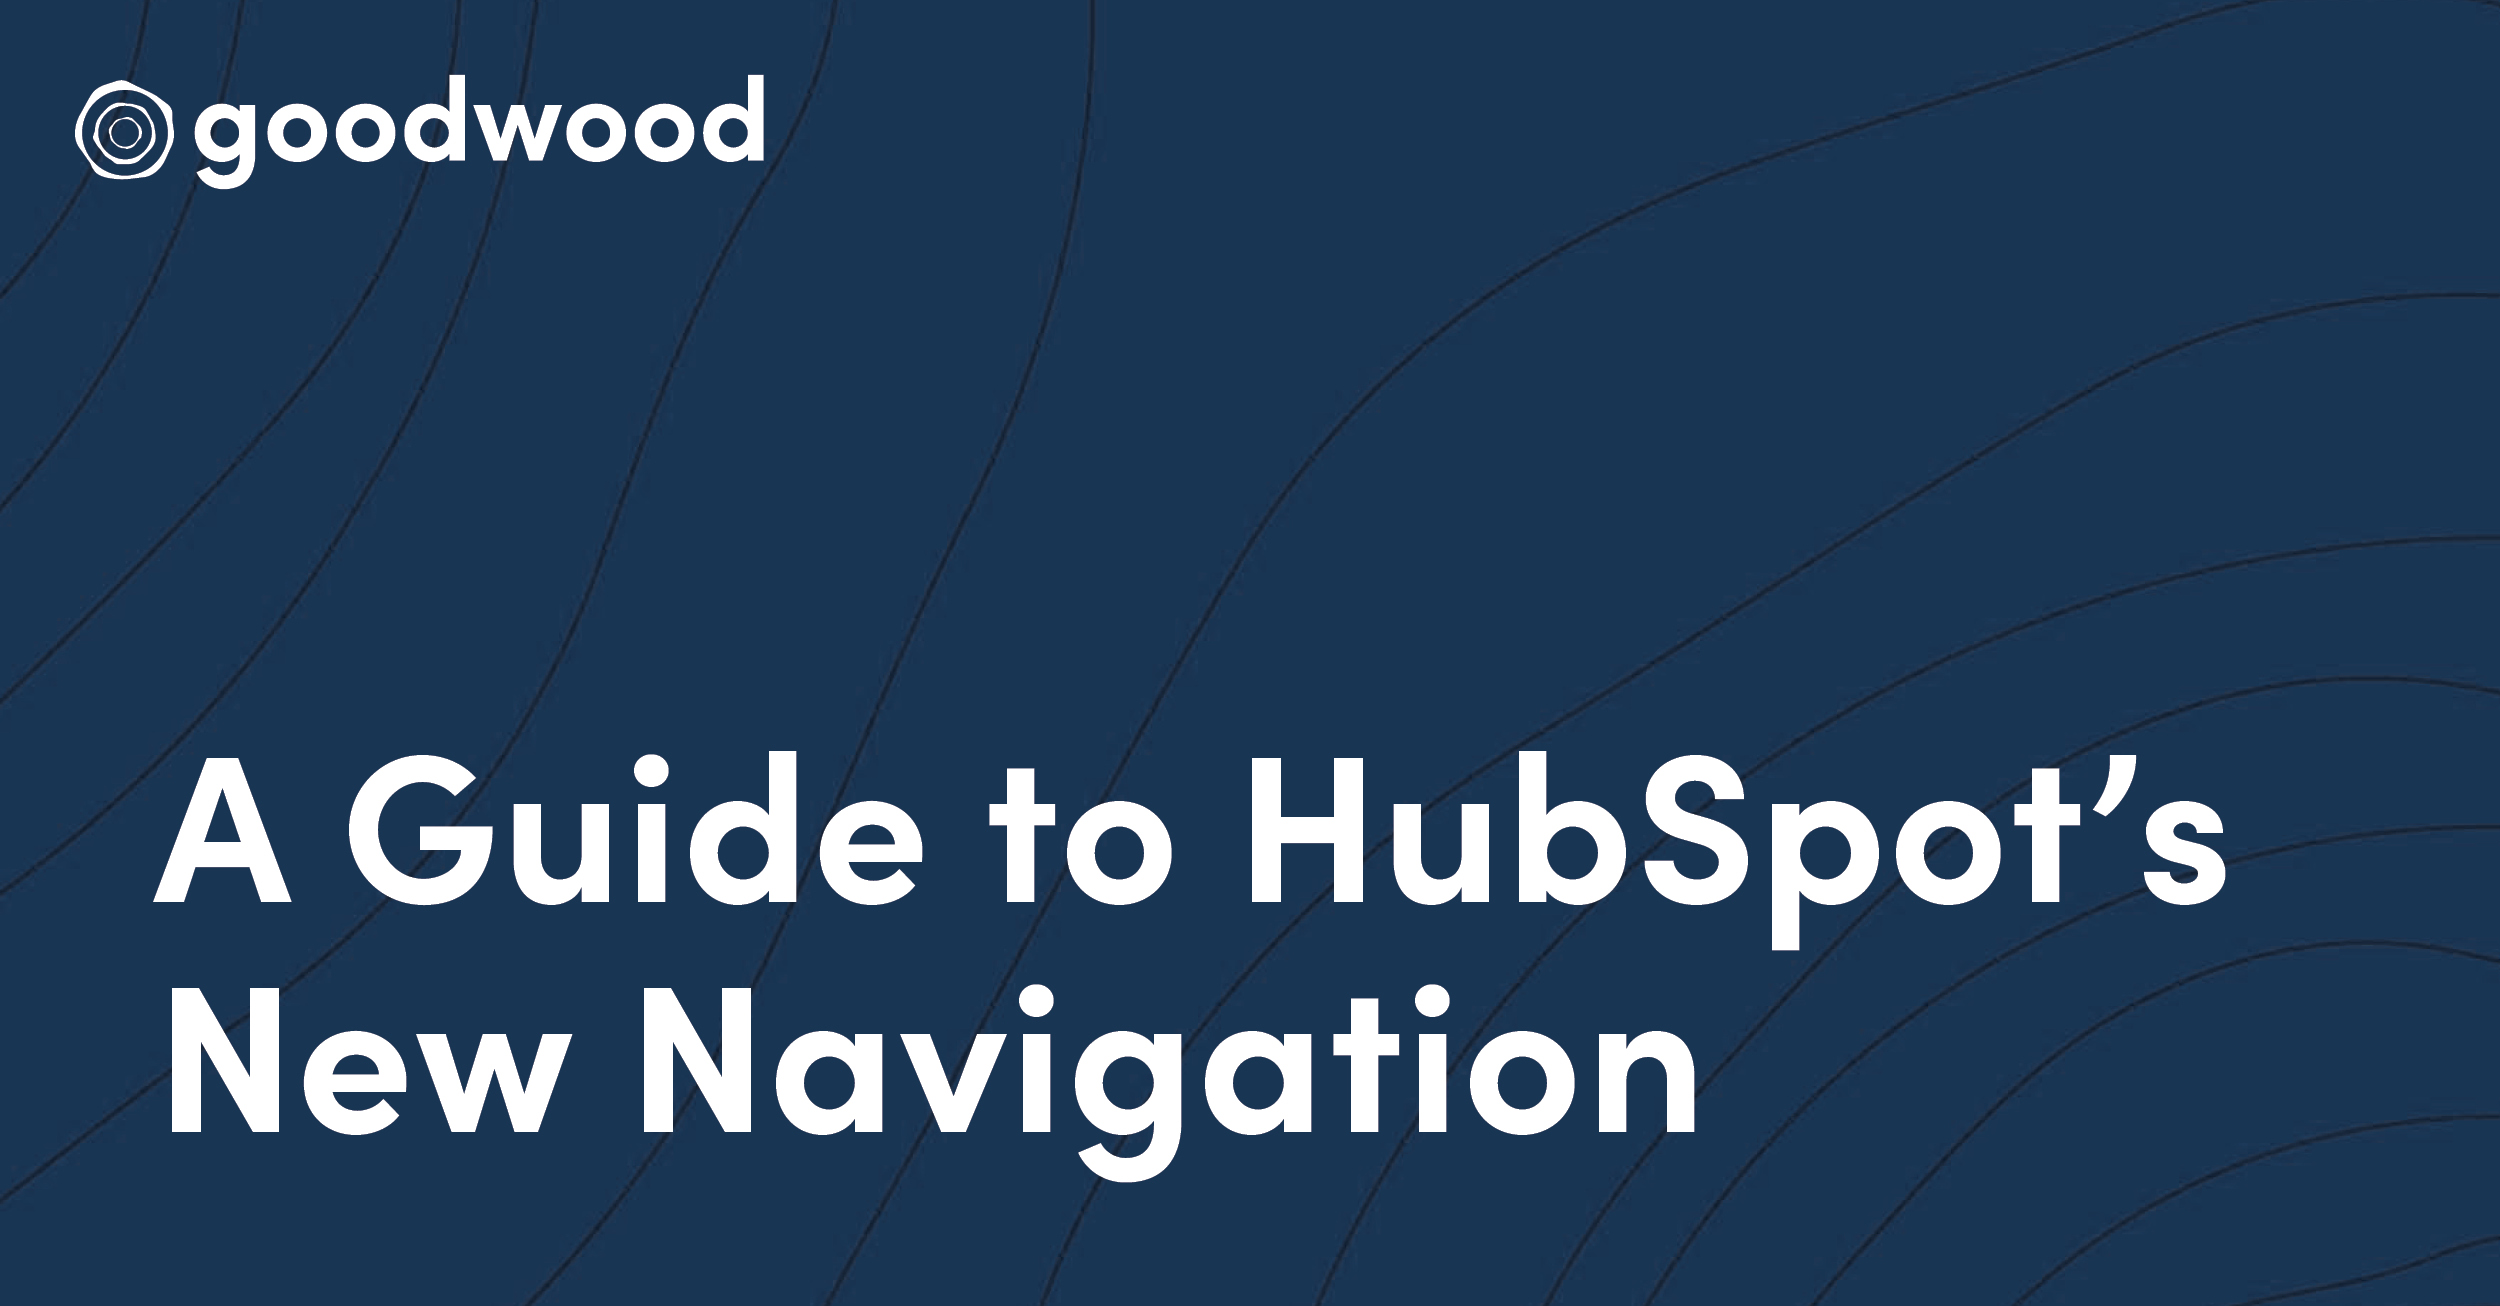 A Guide to HubSpot's New Navigation